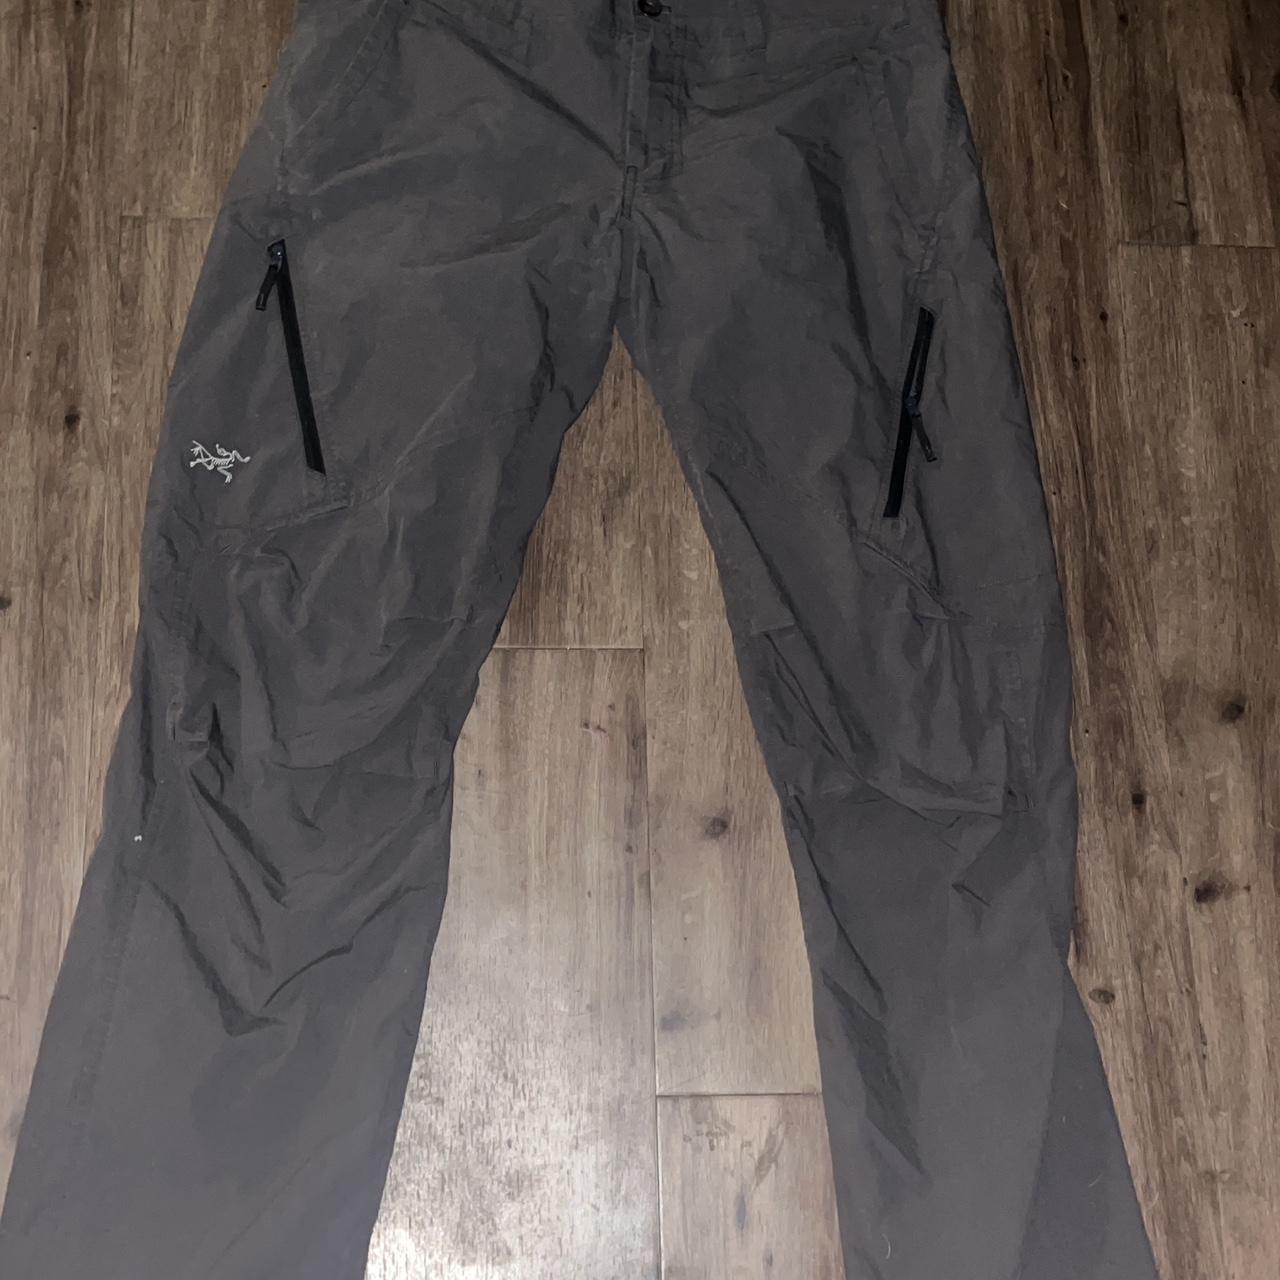 ARC’TERX TRIM FIT PANTS SIZE 34 WILLING TO LOWER PRICE - Depop